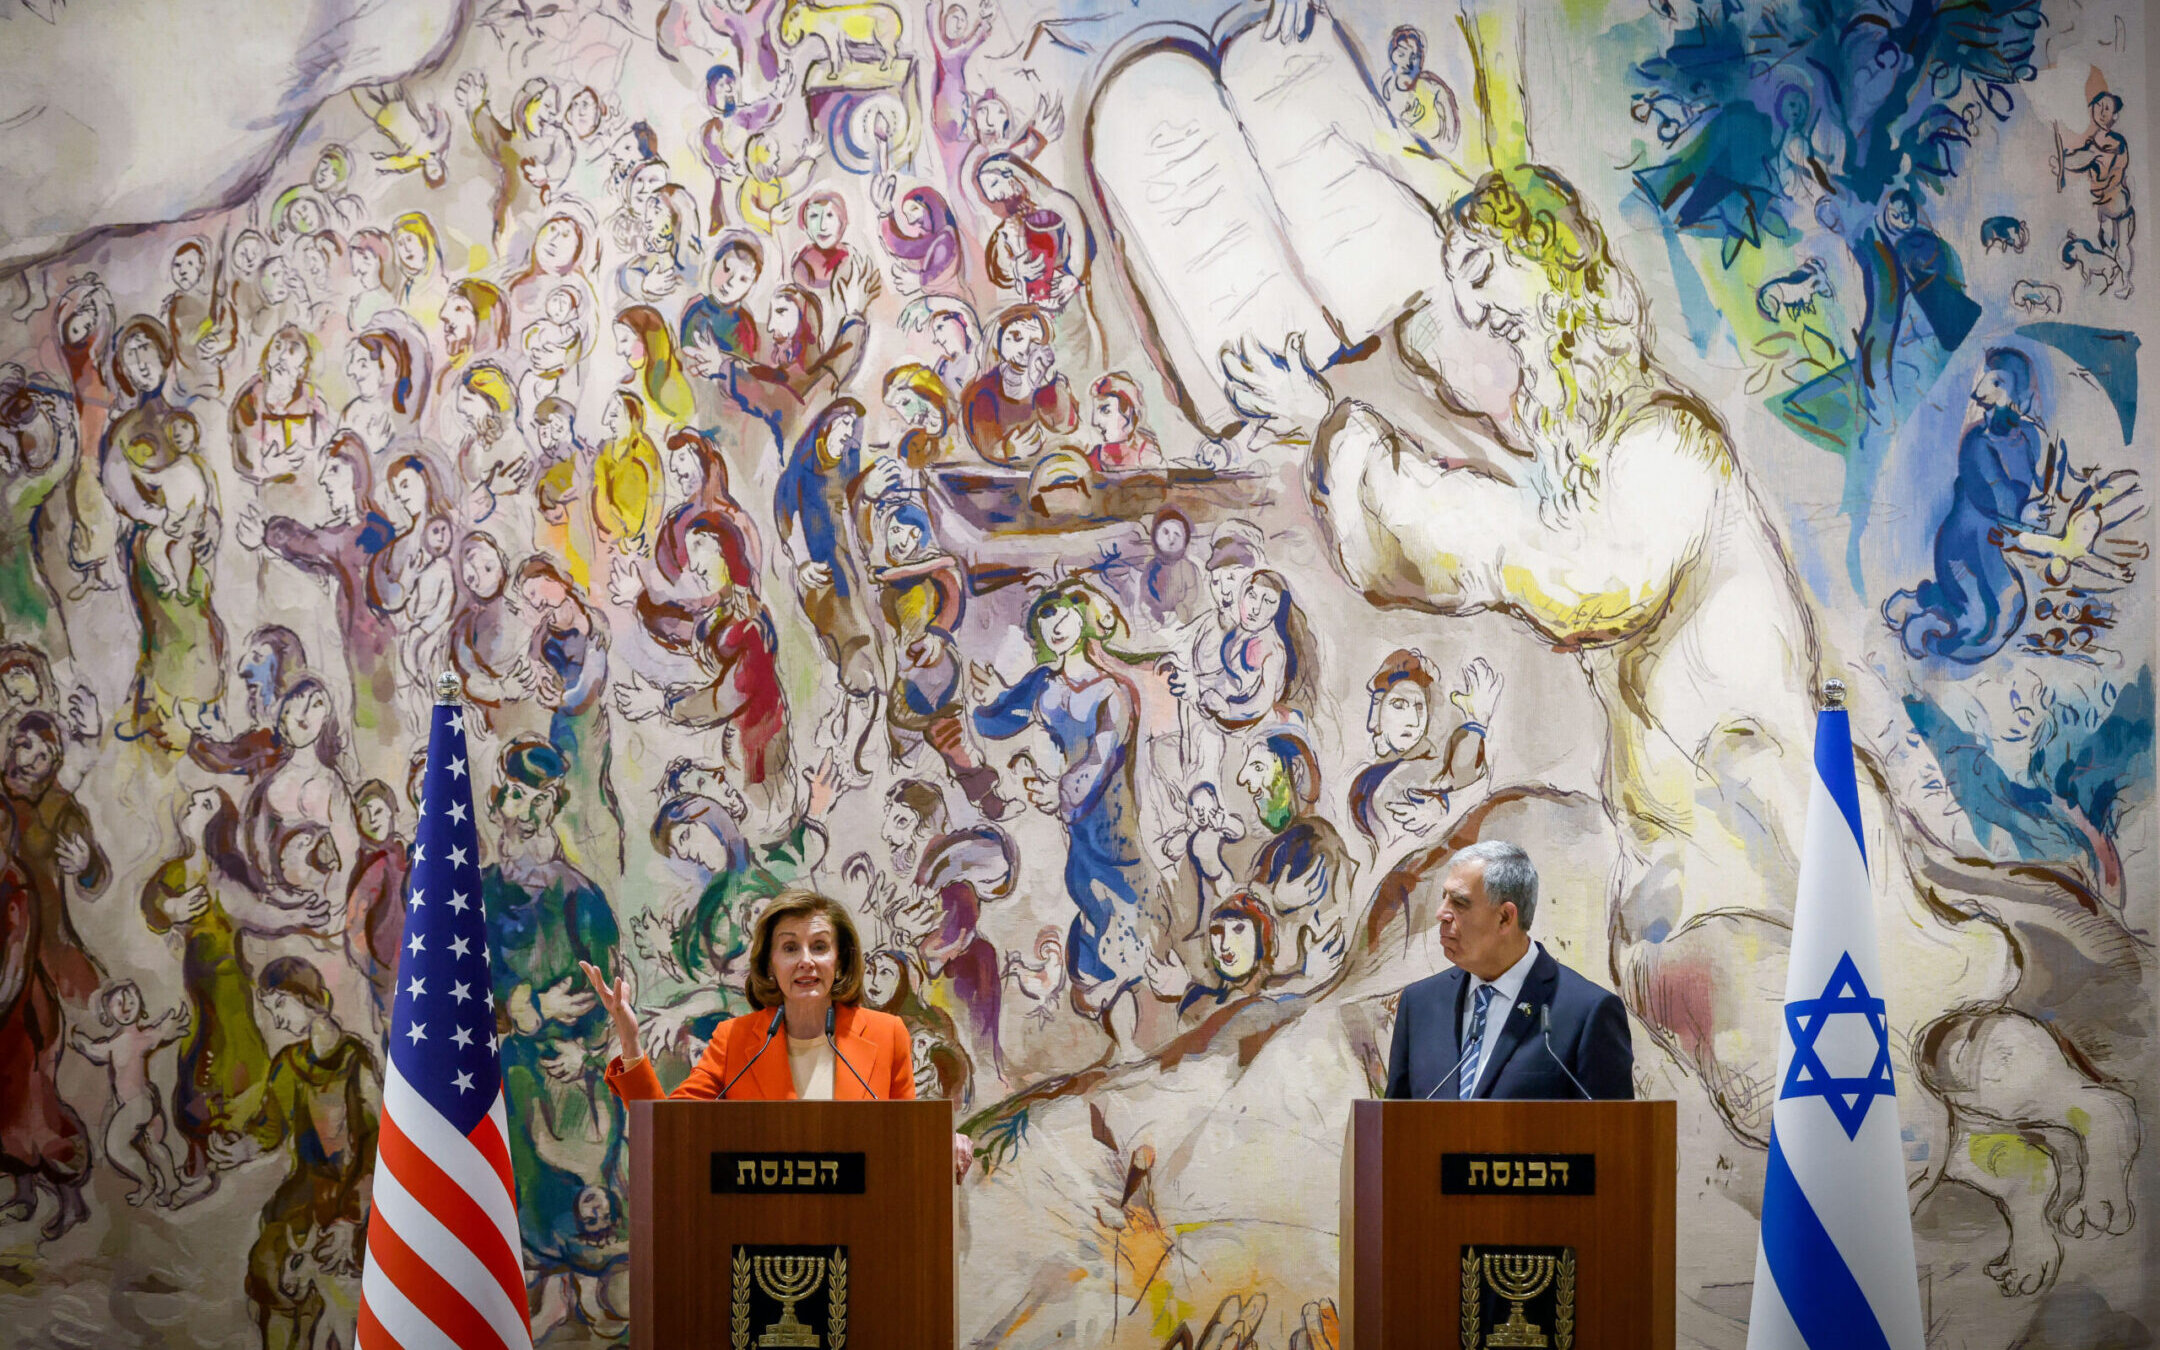 US Speaker of the House Nancy Pelosi with Knesset Speaker Mickey Levy during a joint statement at the Knesset, the Israeli Parliament in Jerusalem, Feb. 16, 2022. (Olivier Fitoussi/Flash90)